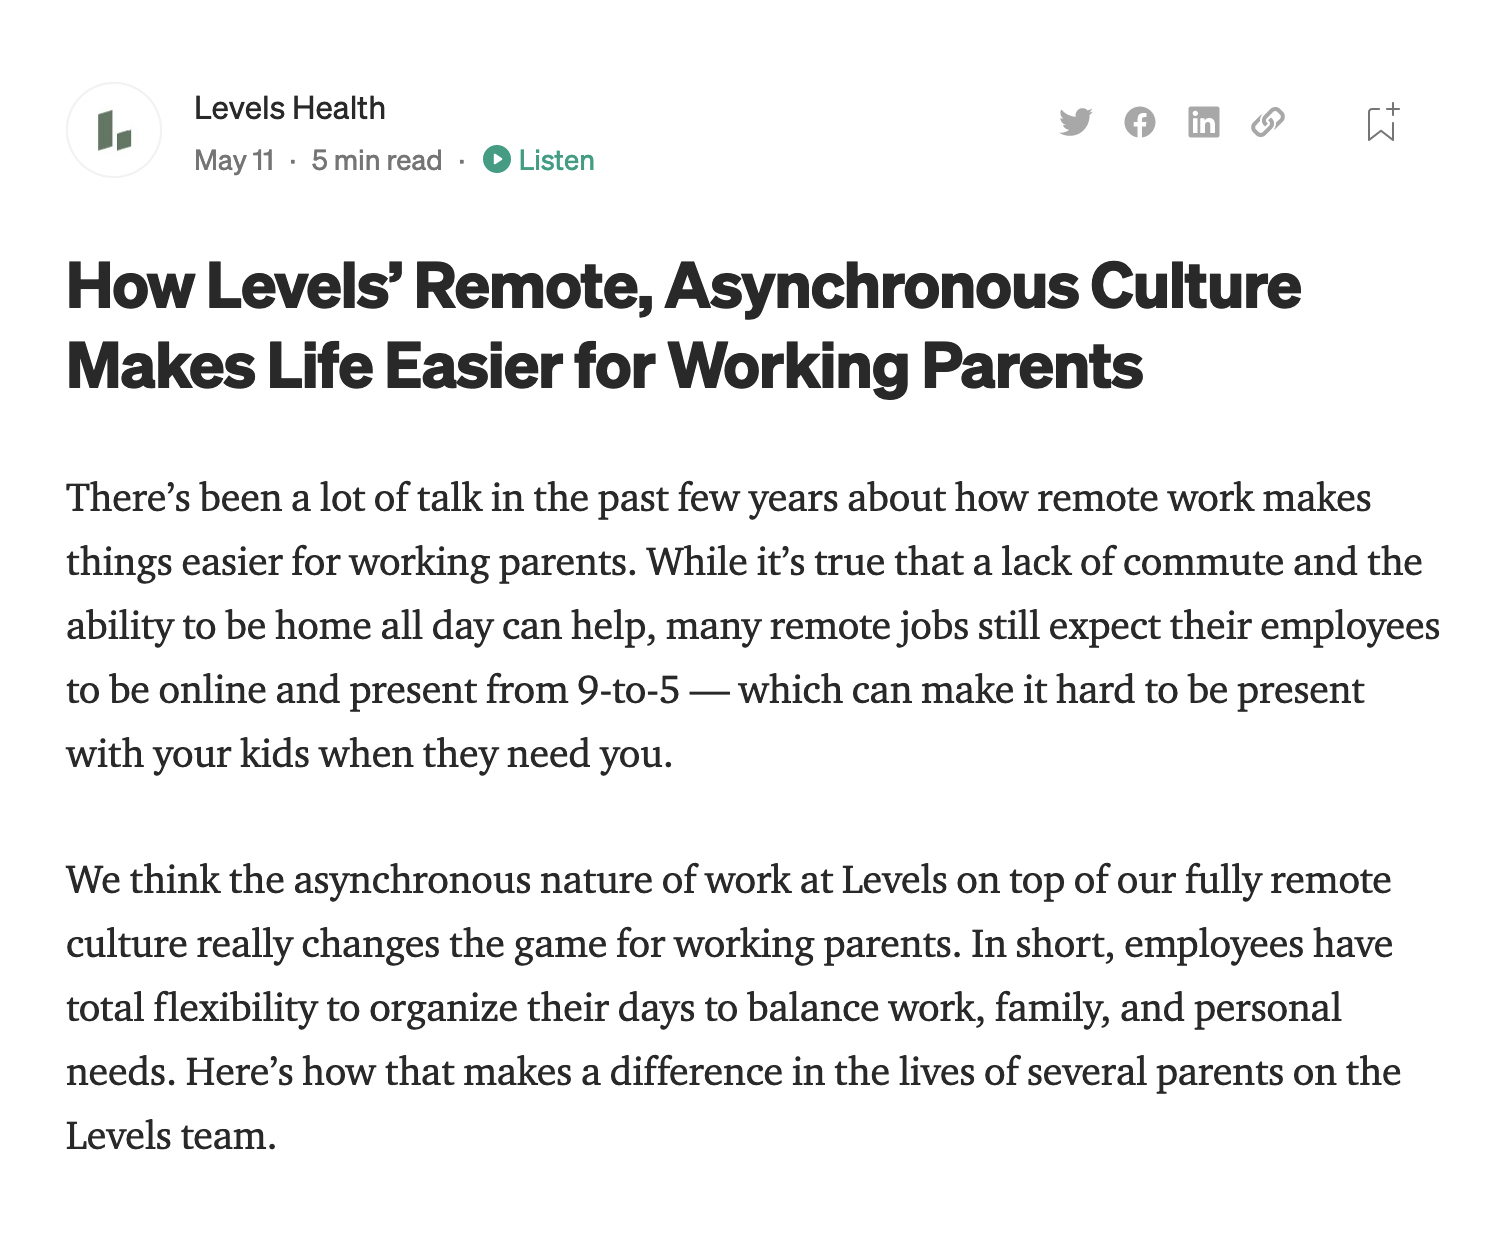 How Levels’ Remote, Asynchronous Culture Makes Life Easier for Working Parents